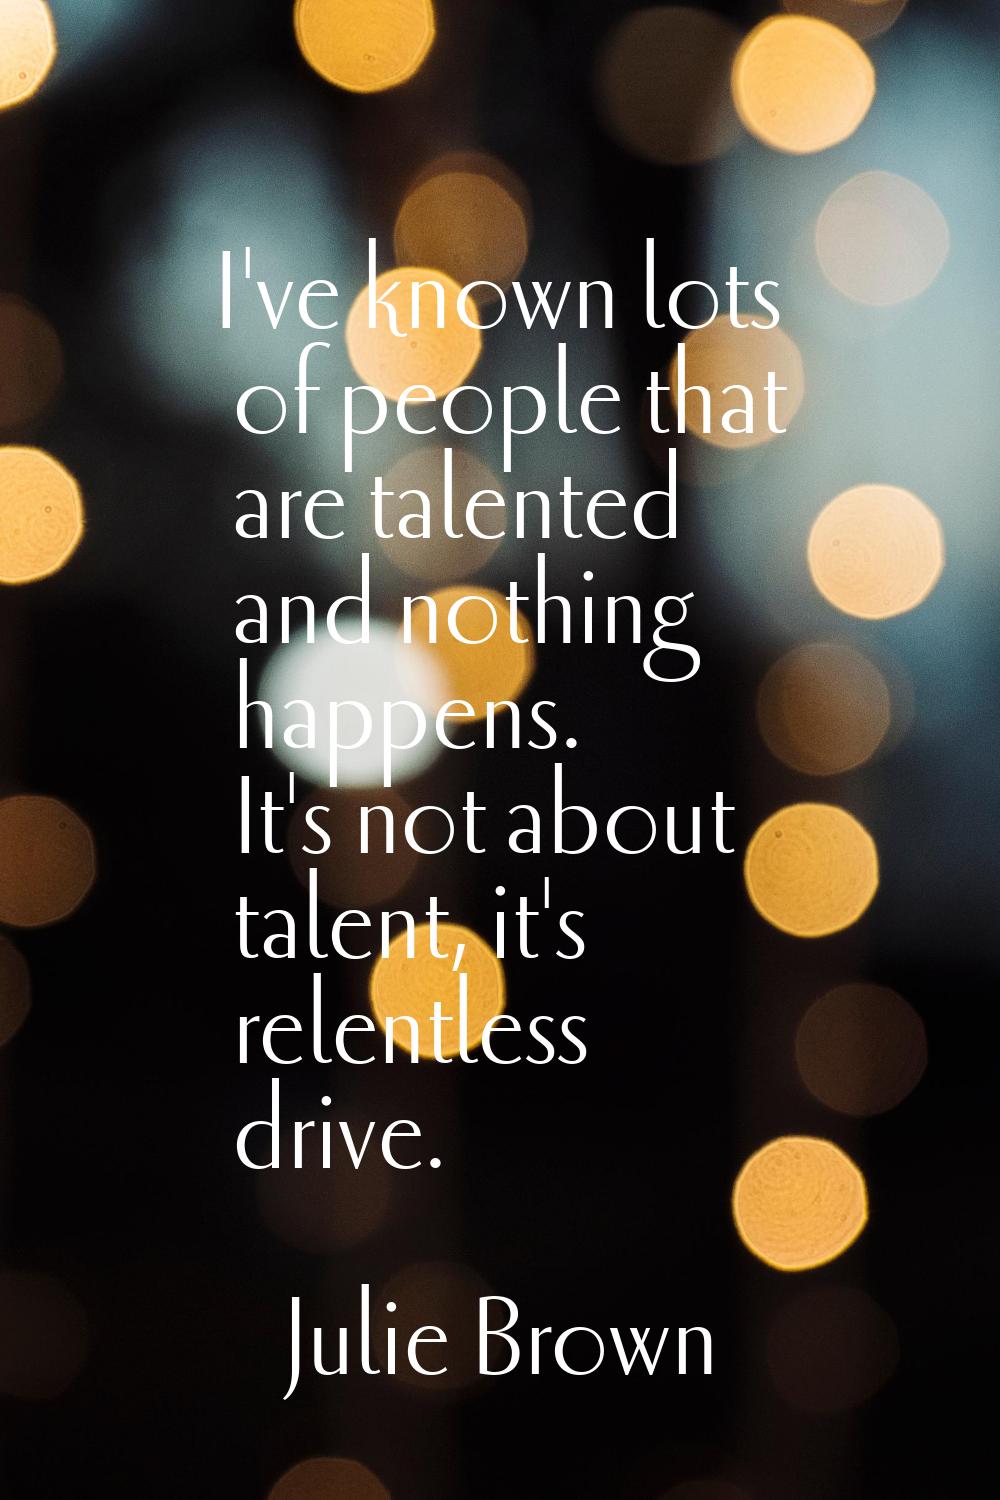 I've known lots of people that are talented and nothing happens. It's not about talent, it's relent